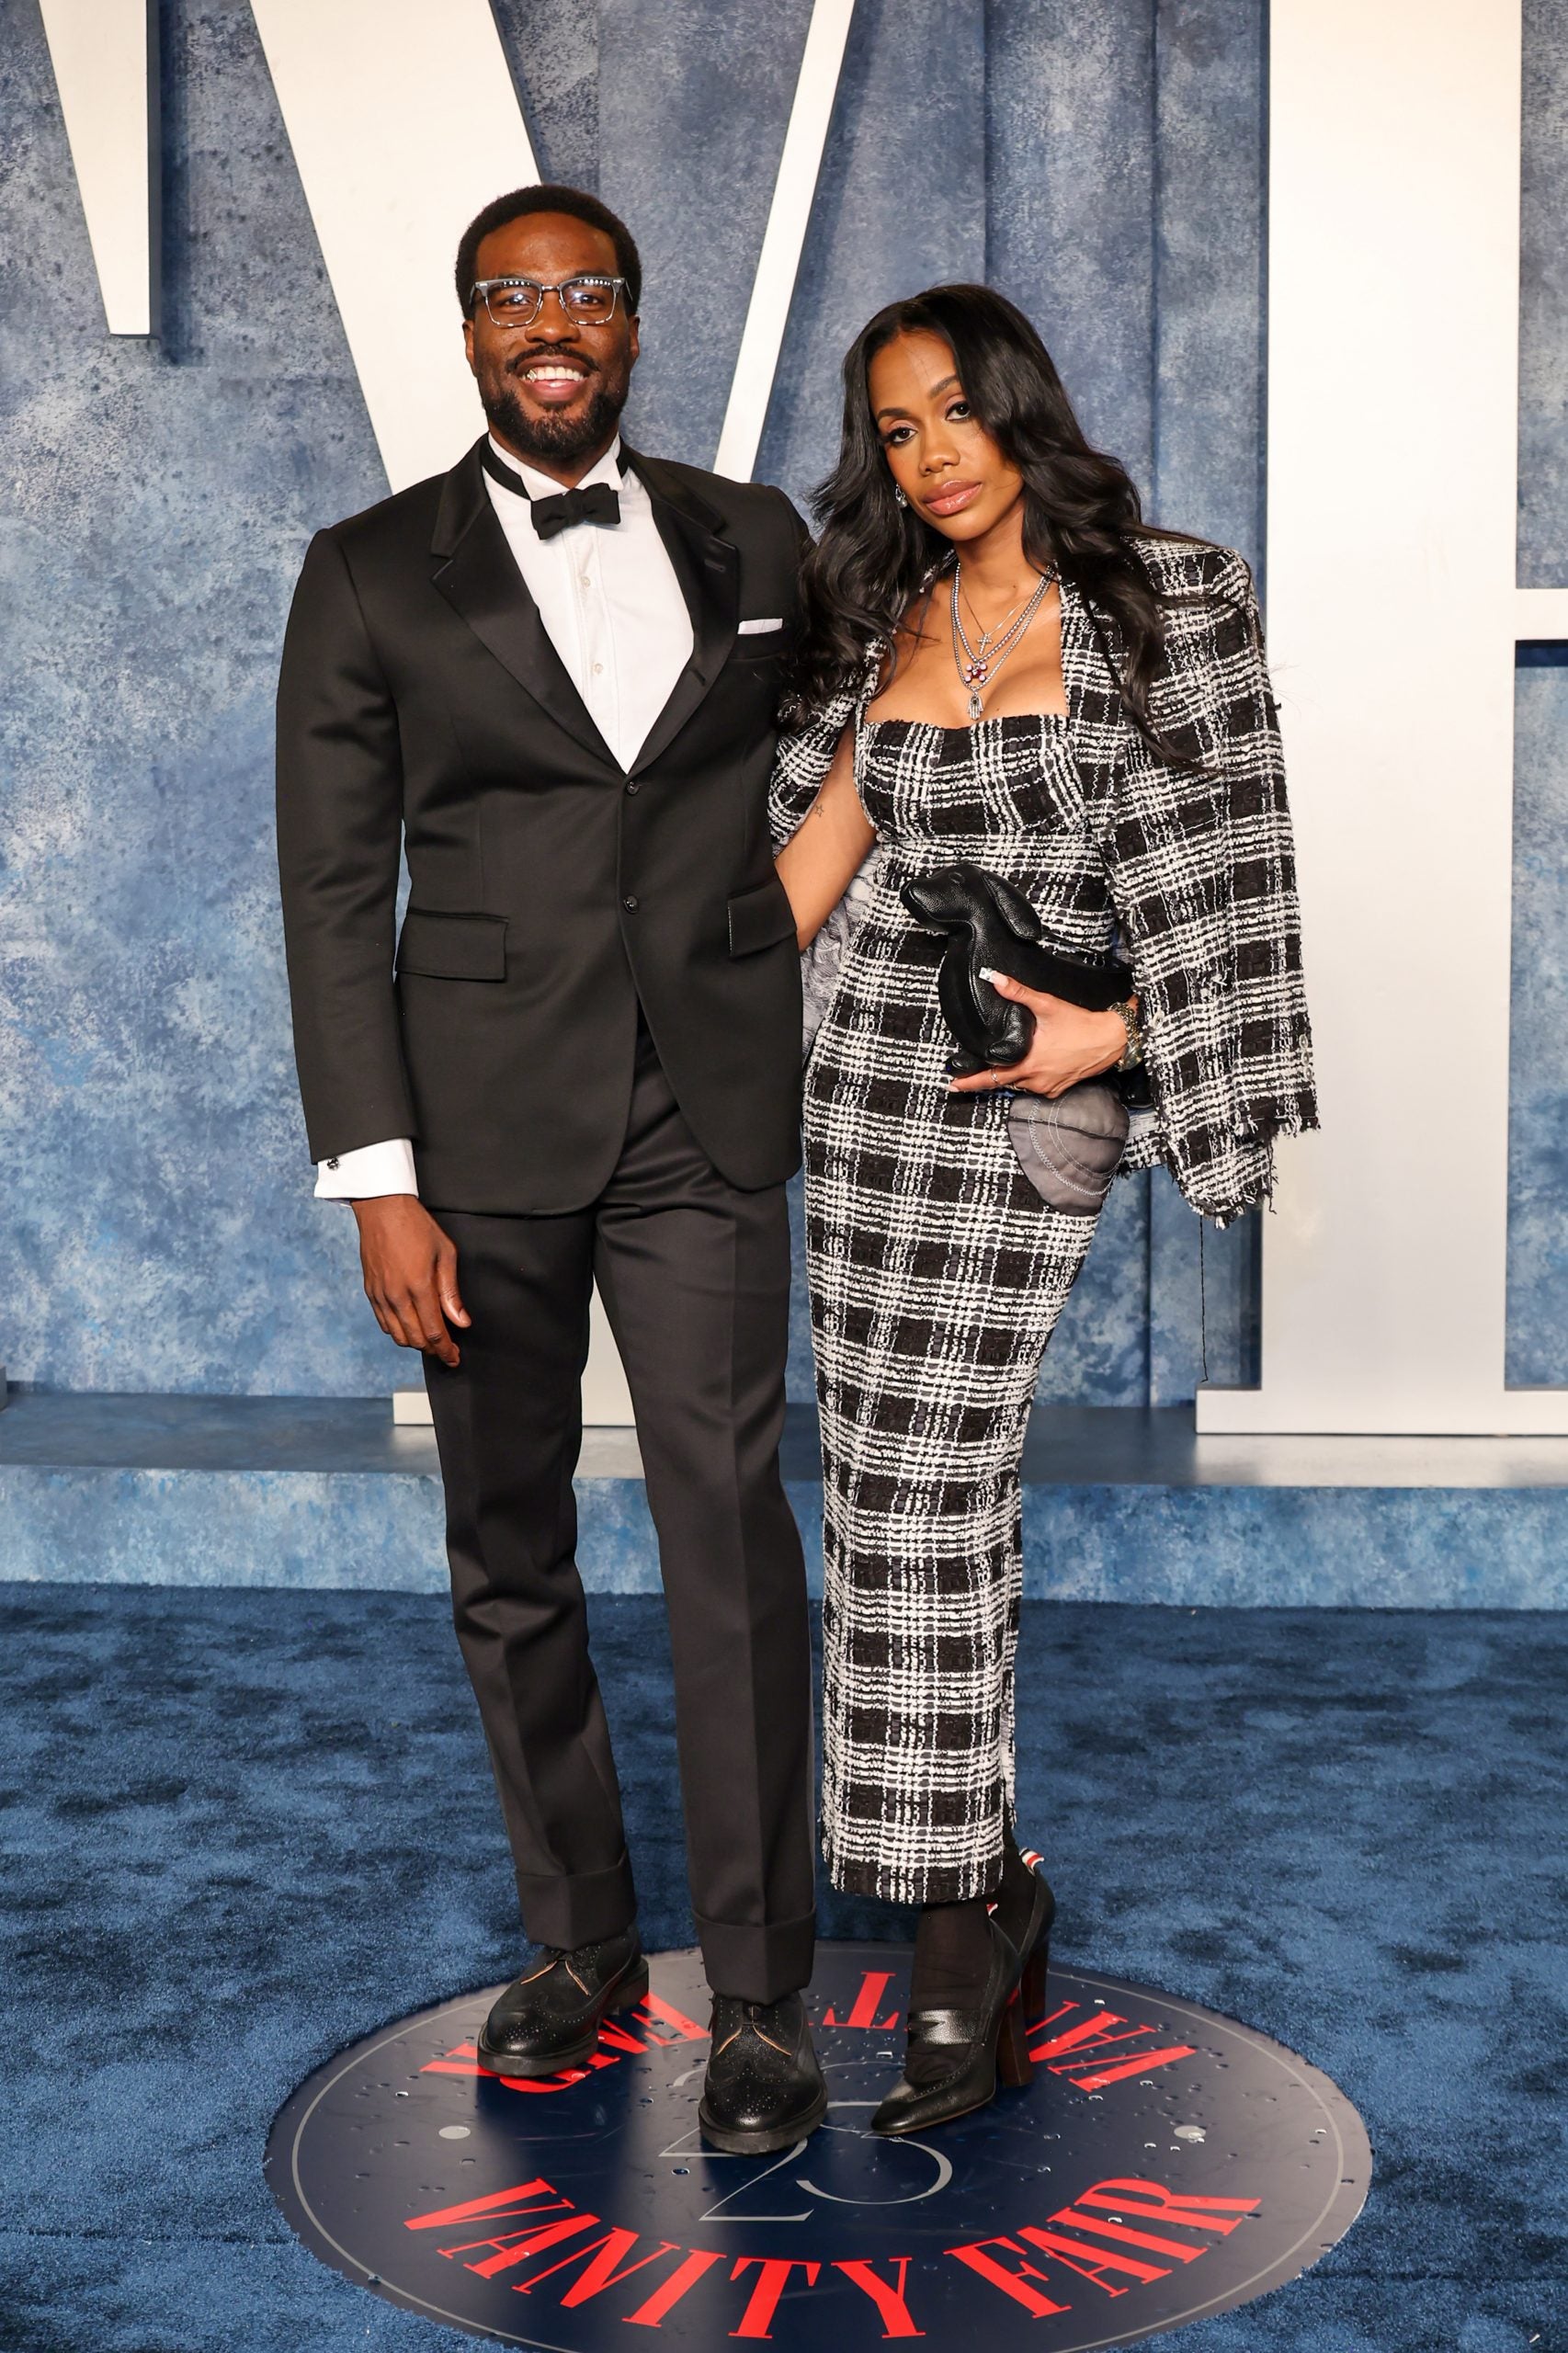 In Case You Missed It, Yahya Abdul-Mateen II Is Off The Market